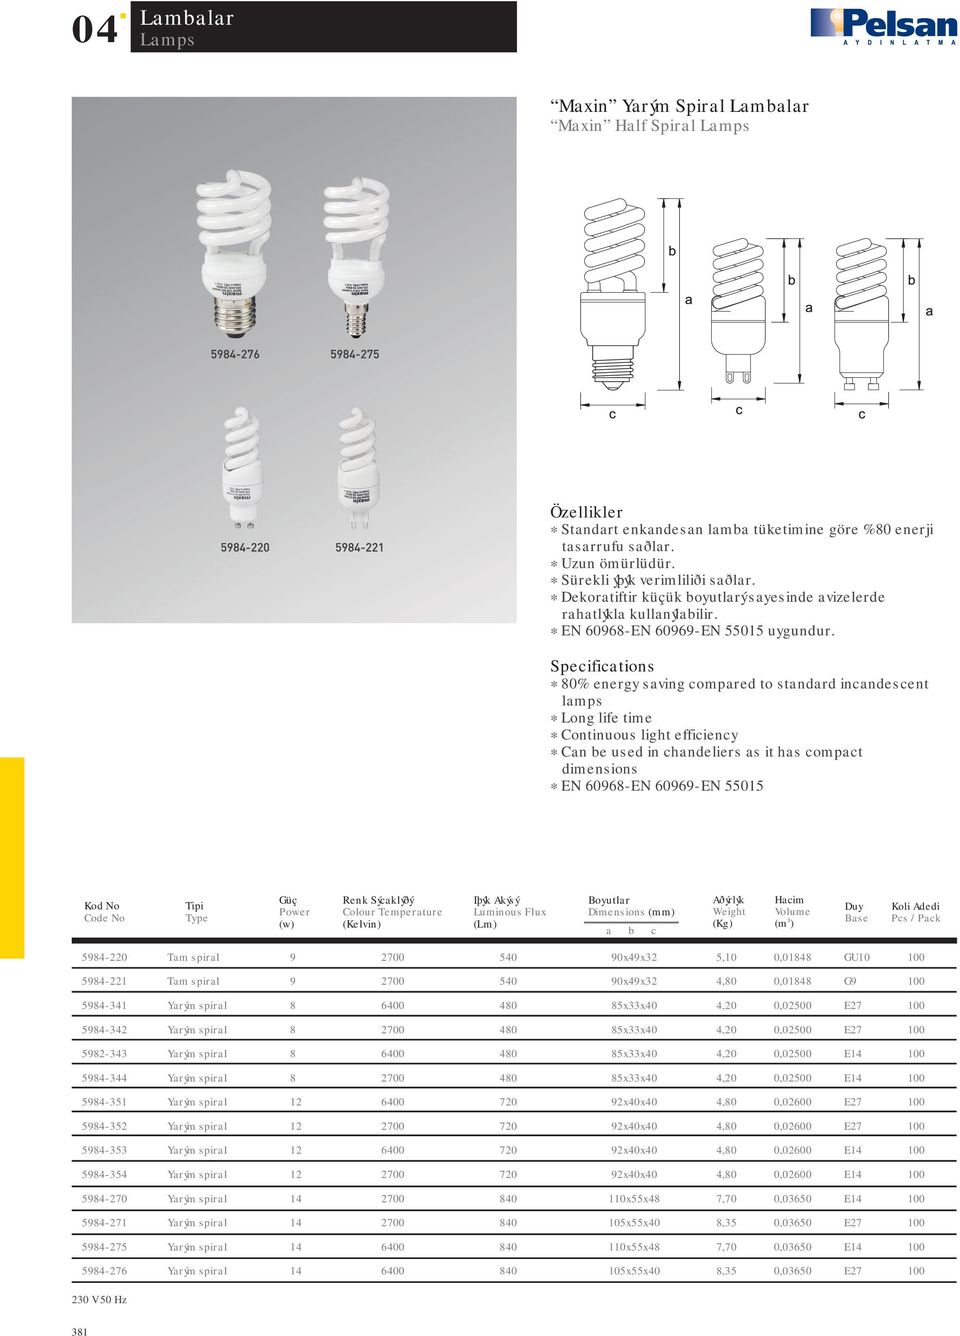 * 80% energy saving compared to standard incandescent lamps * Continuous light efficiency * Can be used in chandeliers as it has compact dimensions * EN 60968-EN 60969-EN 515 5984-220 Tam spiral 9